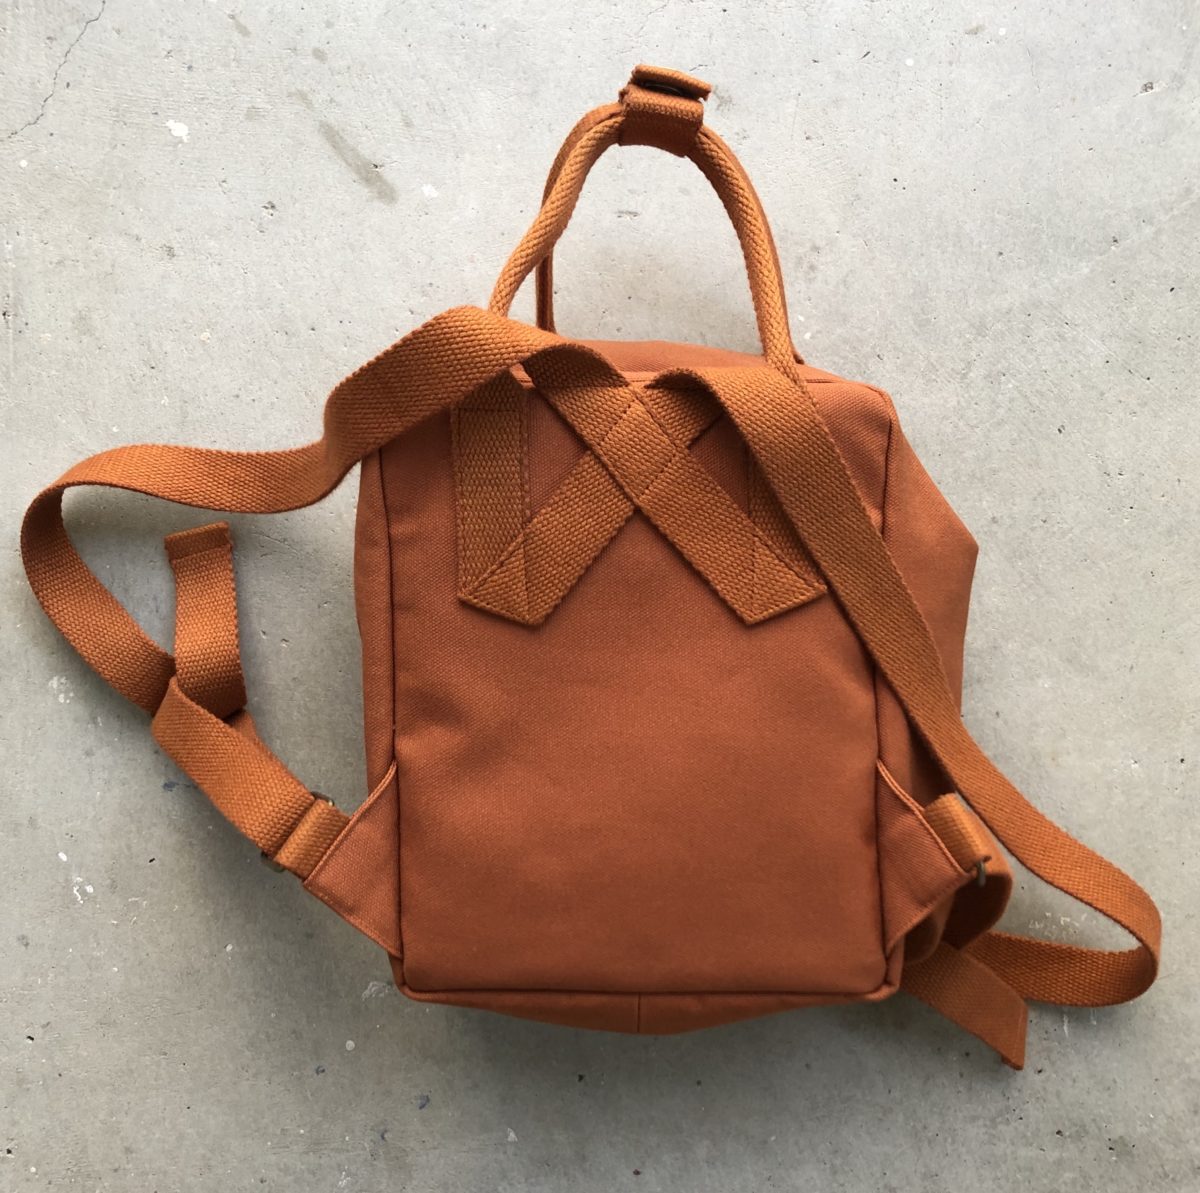 houding Vete Silicium Pattern Testing | Raspberry Rucksack by Sarah Kirsten – NOT A PRIMARY COLOR